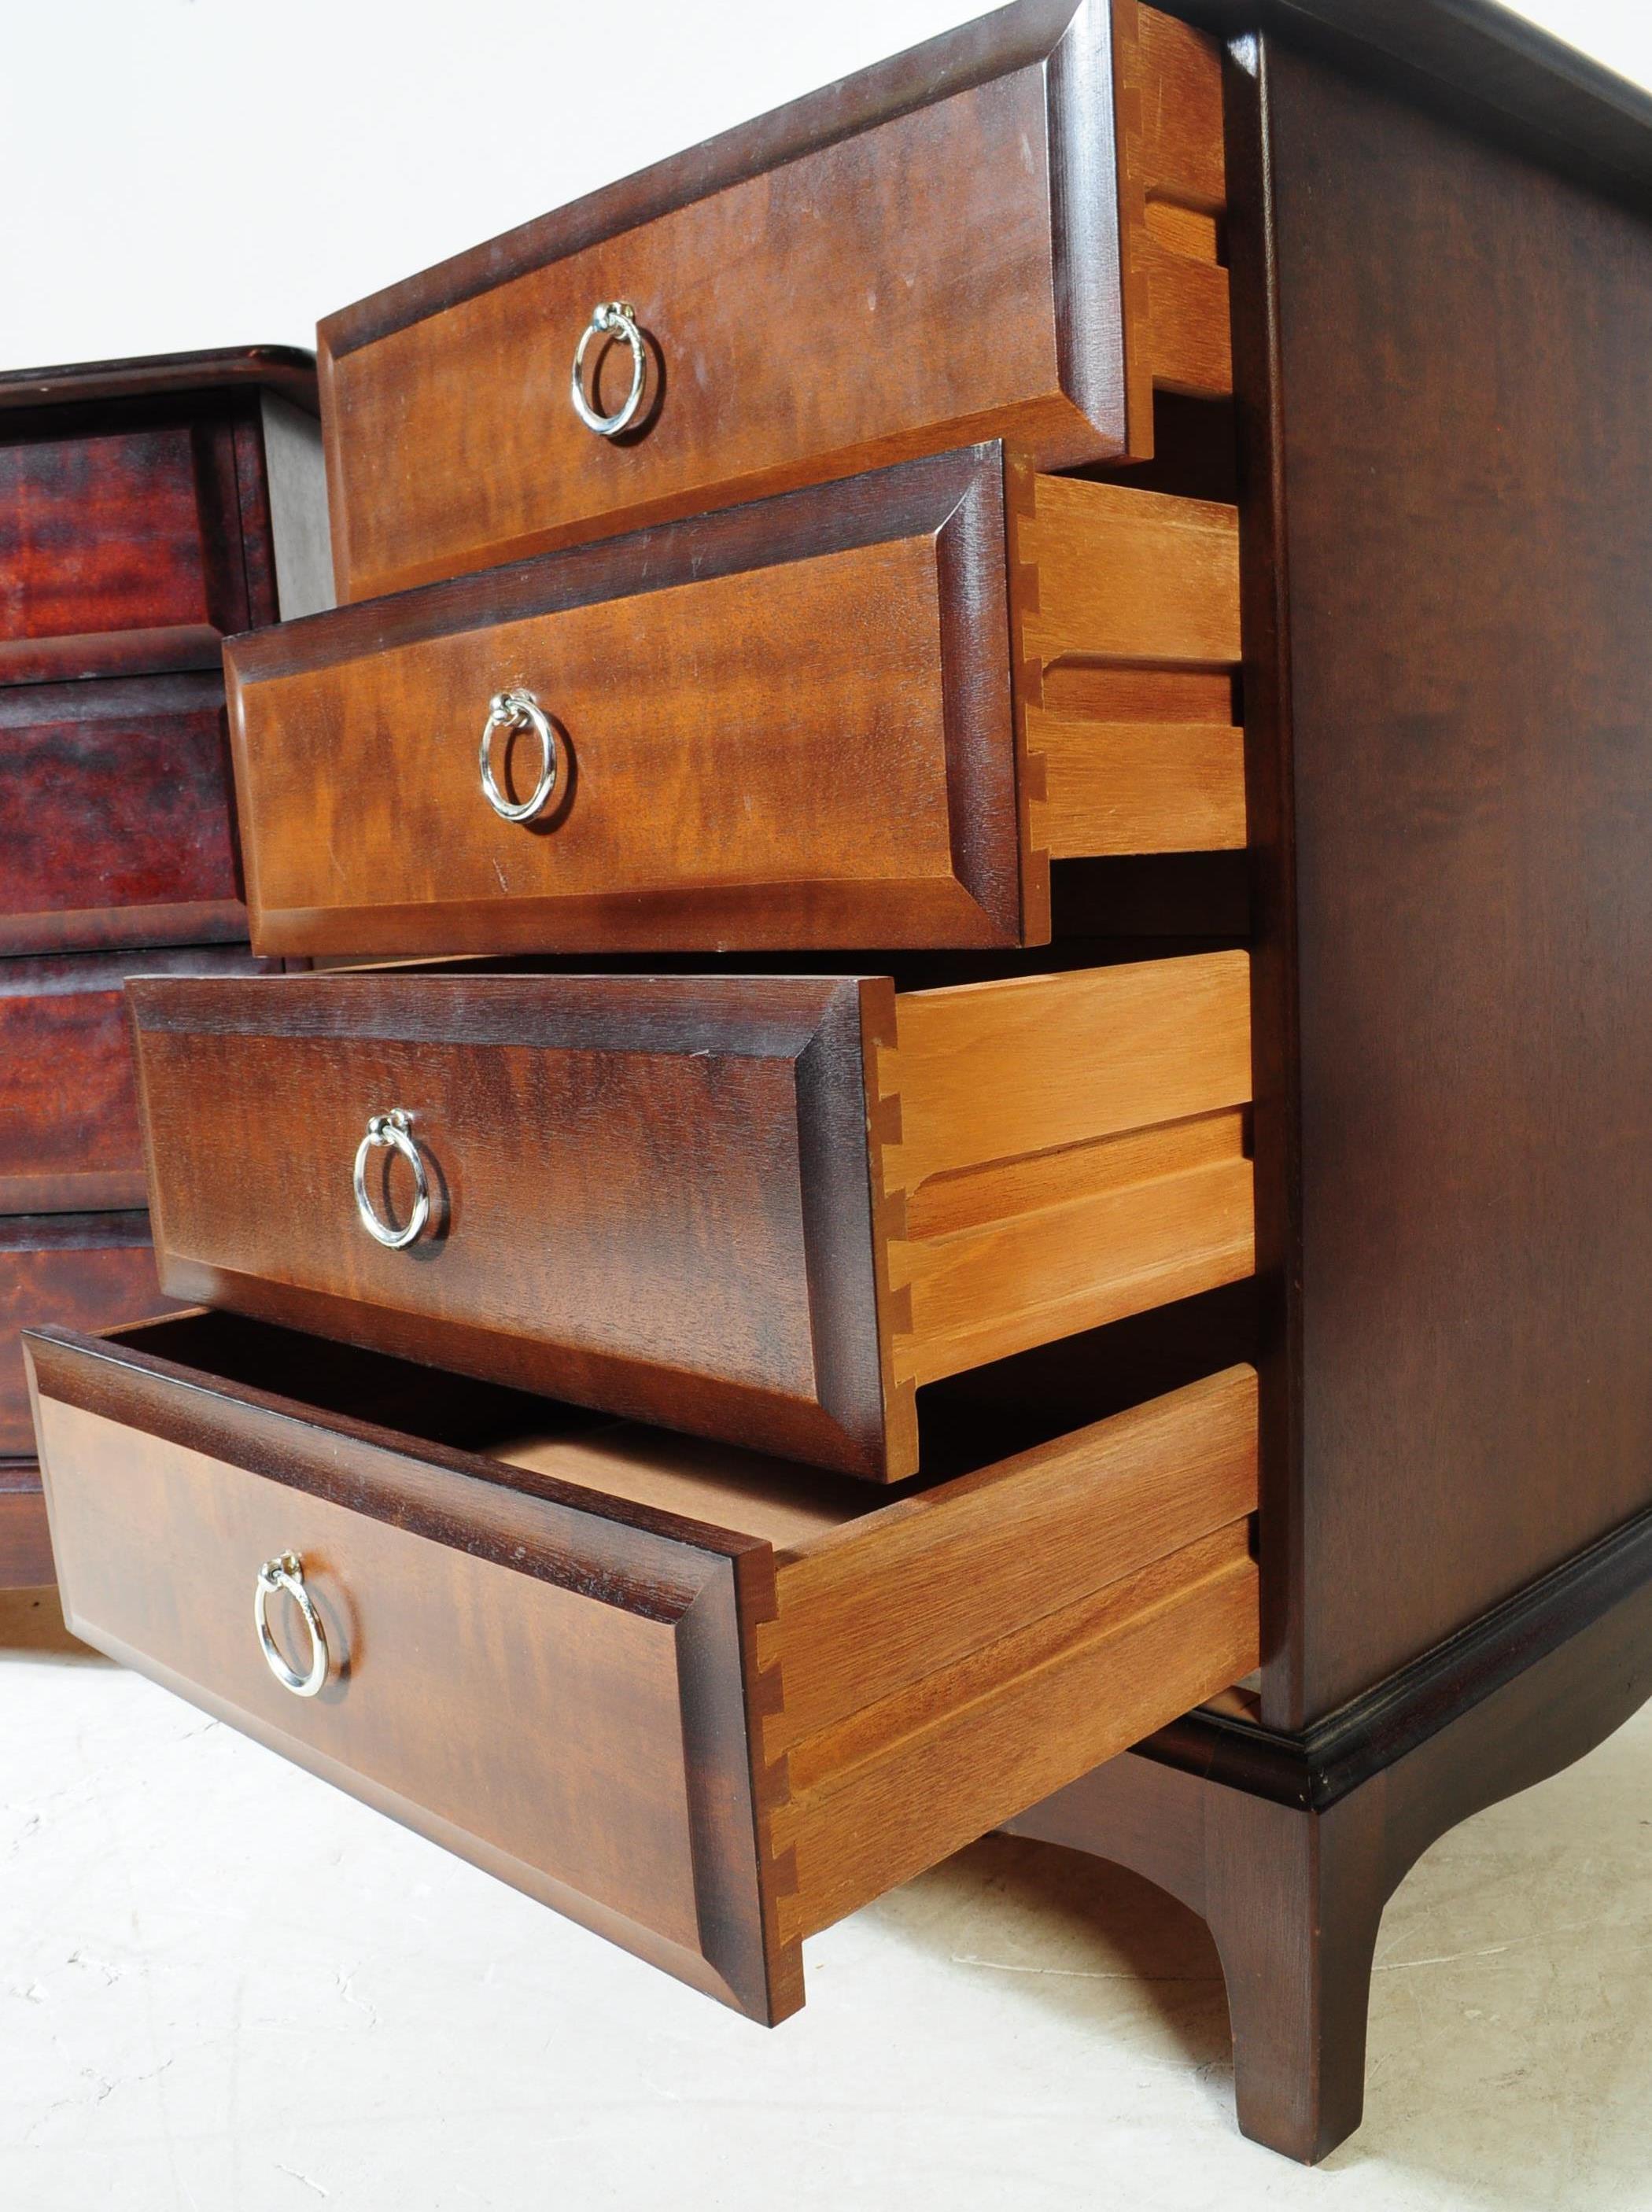 STAG FURNITURE MINSTREL PAIR OF BEDSIDE CHESTS OF DRAWERS - Image 5 of 9